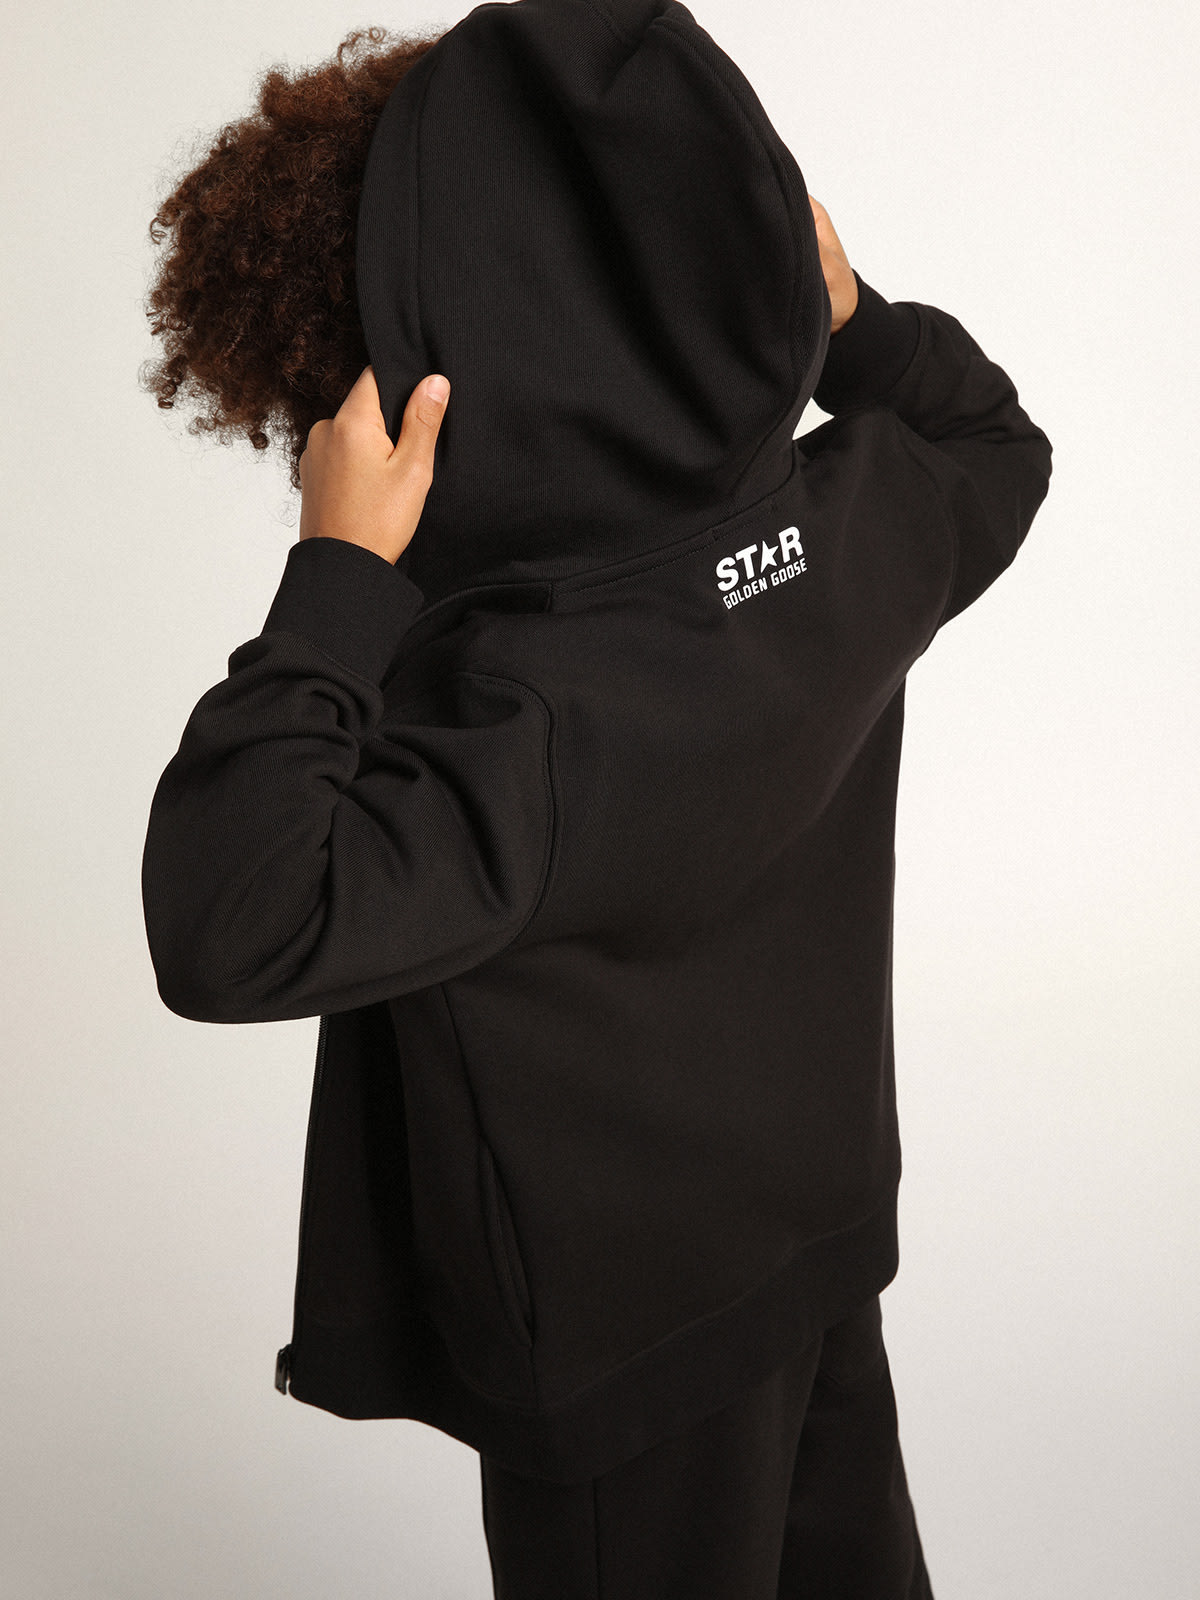 Golden Goose - Black hooded sweatshirt with contrasting white star and logo in 